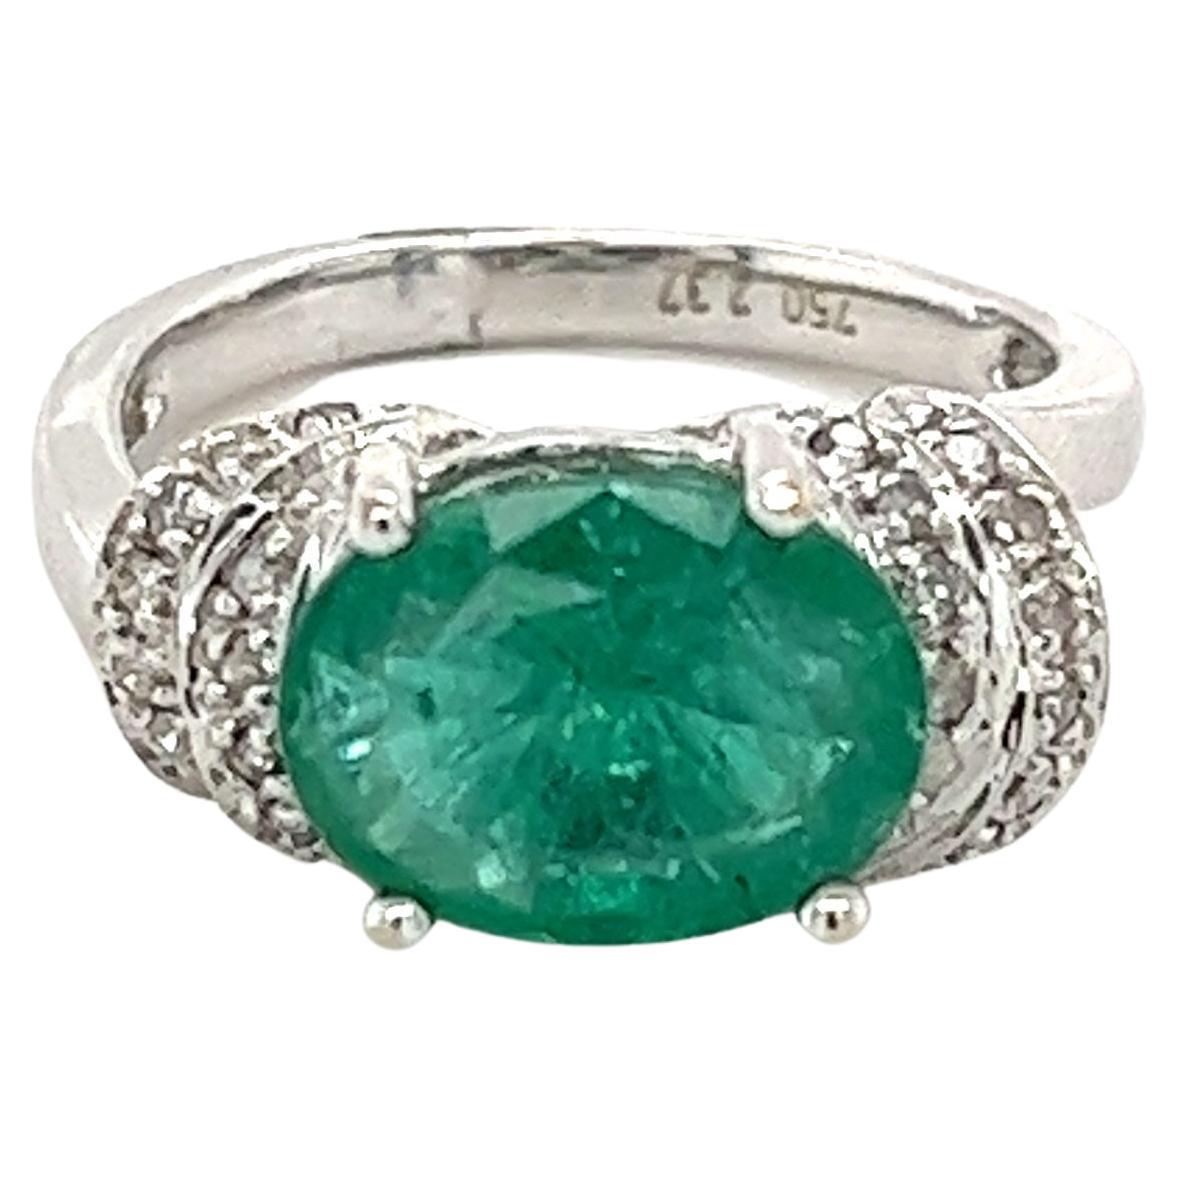 2.37 Carat Oval Cut Colombian Emerald in Retro Curved White Gold 4-Prong Ring  For Sale